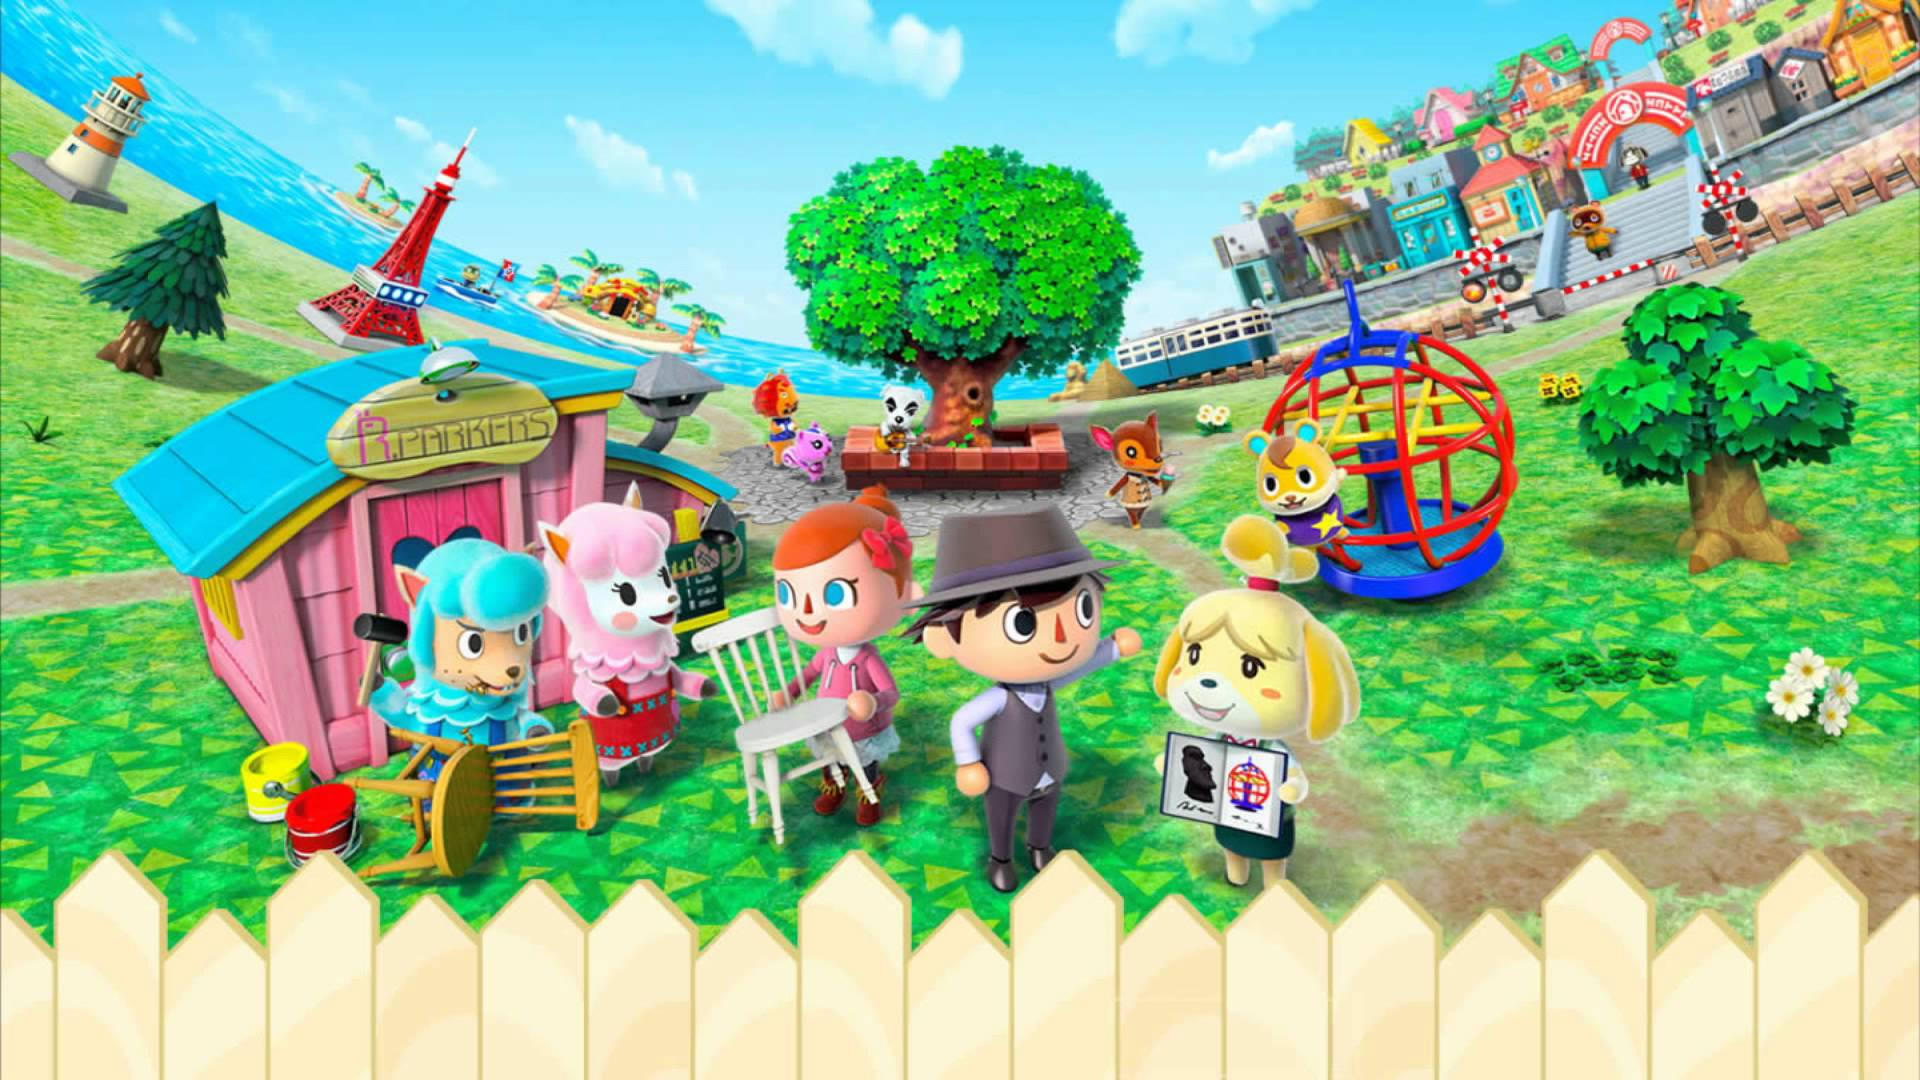 Start your island getaway in the world of Animal Crossing Wallpaper